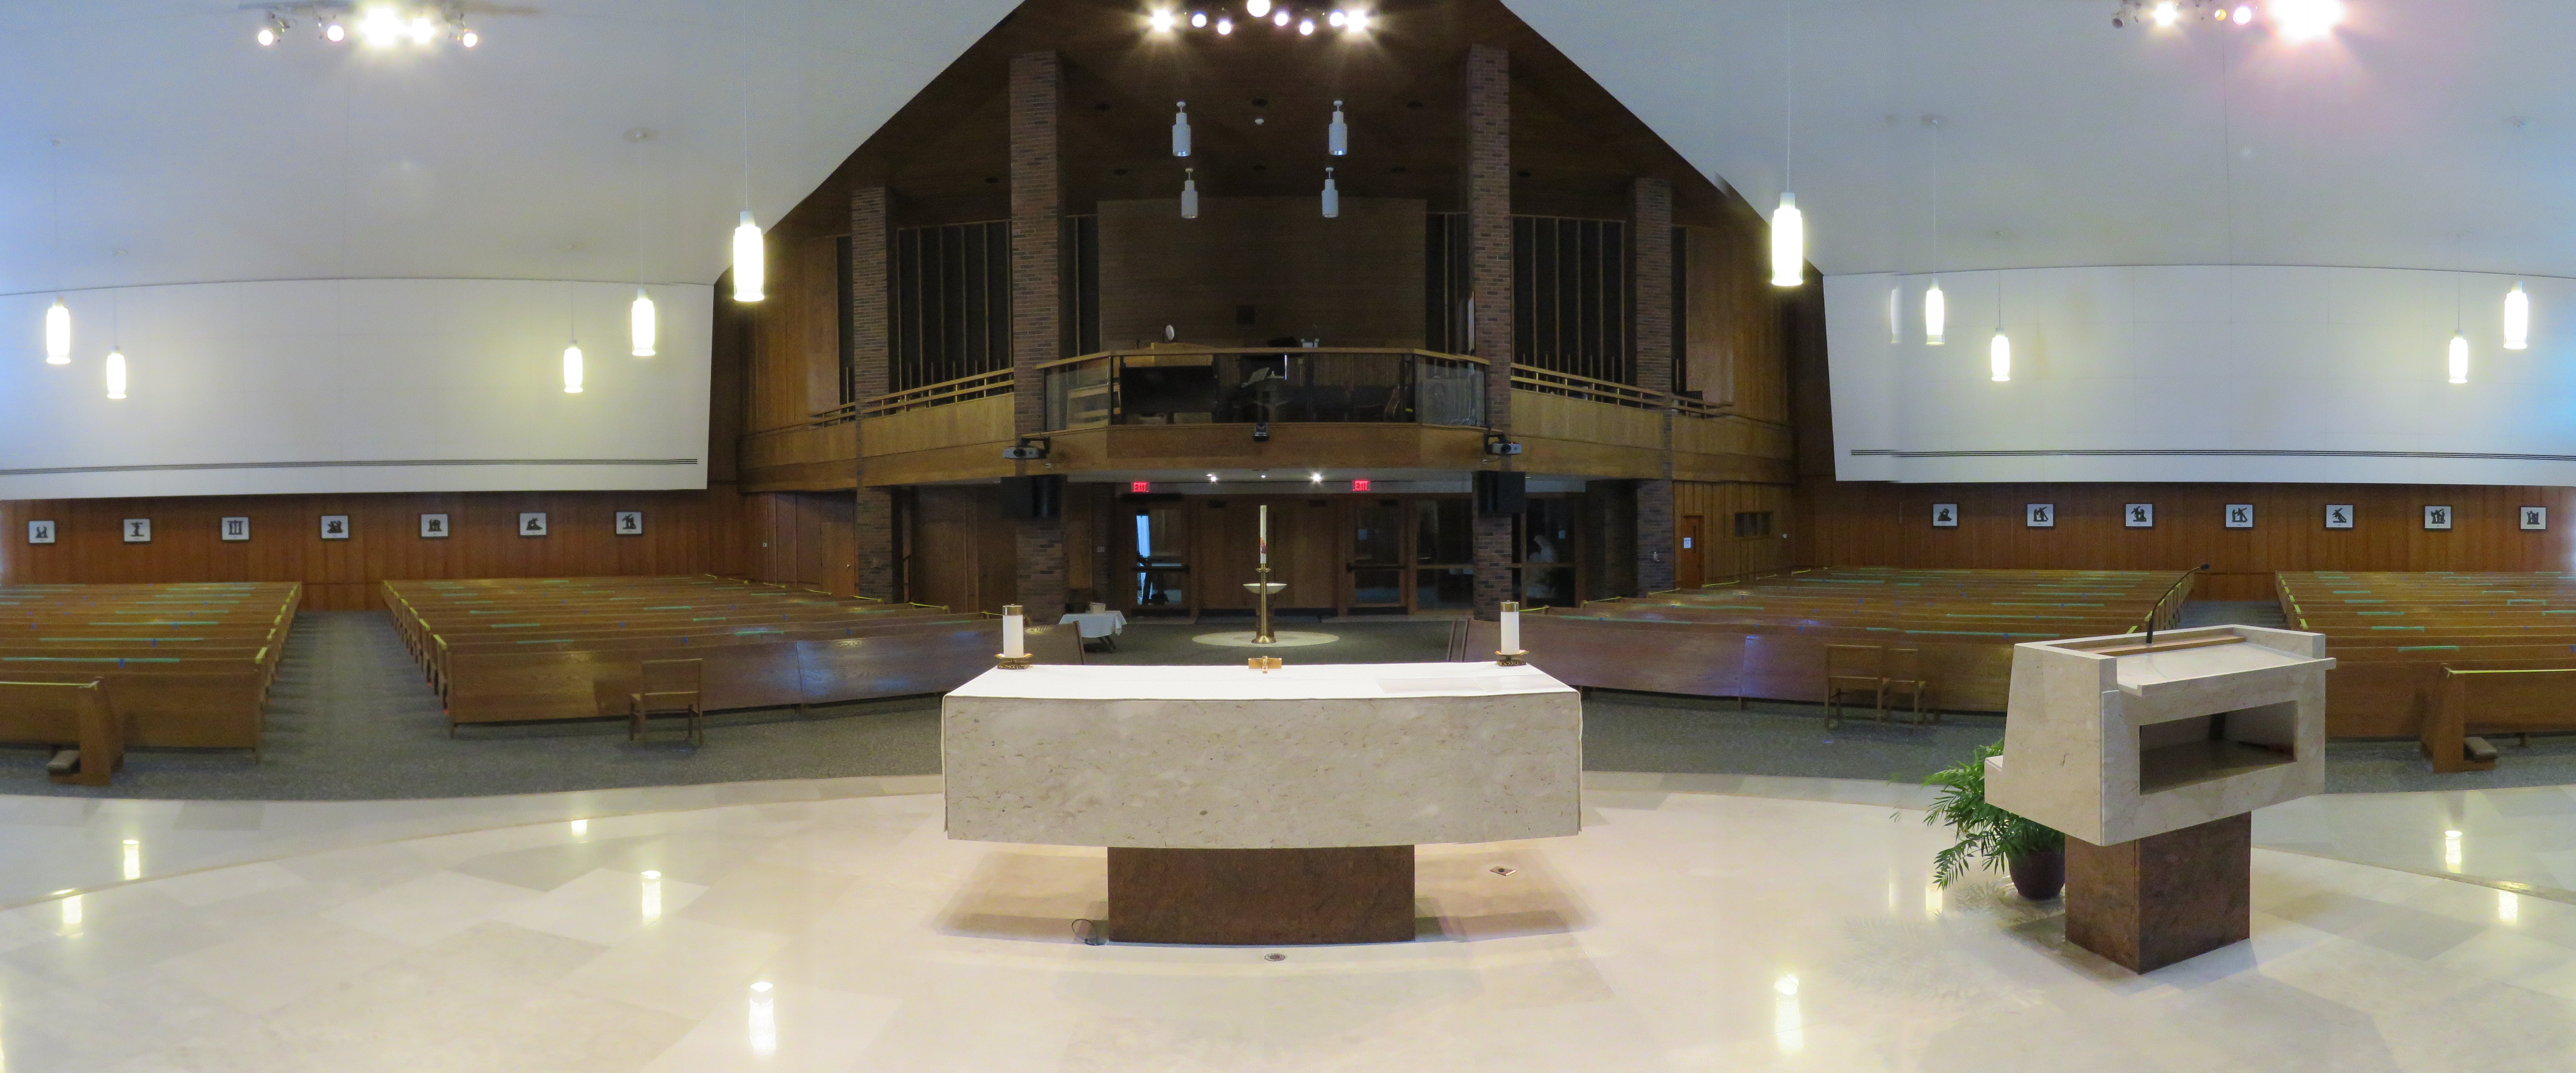 Interior of St. Mary's church from the sanctuary